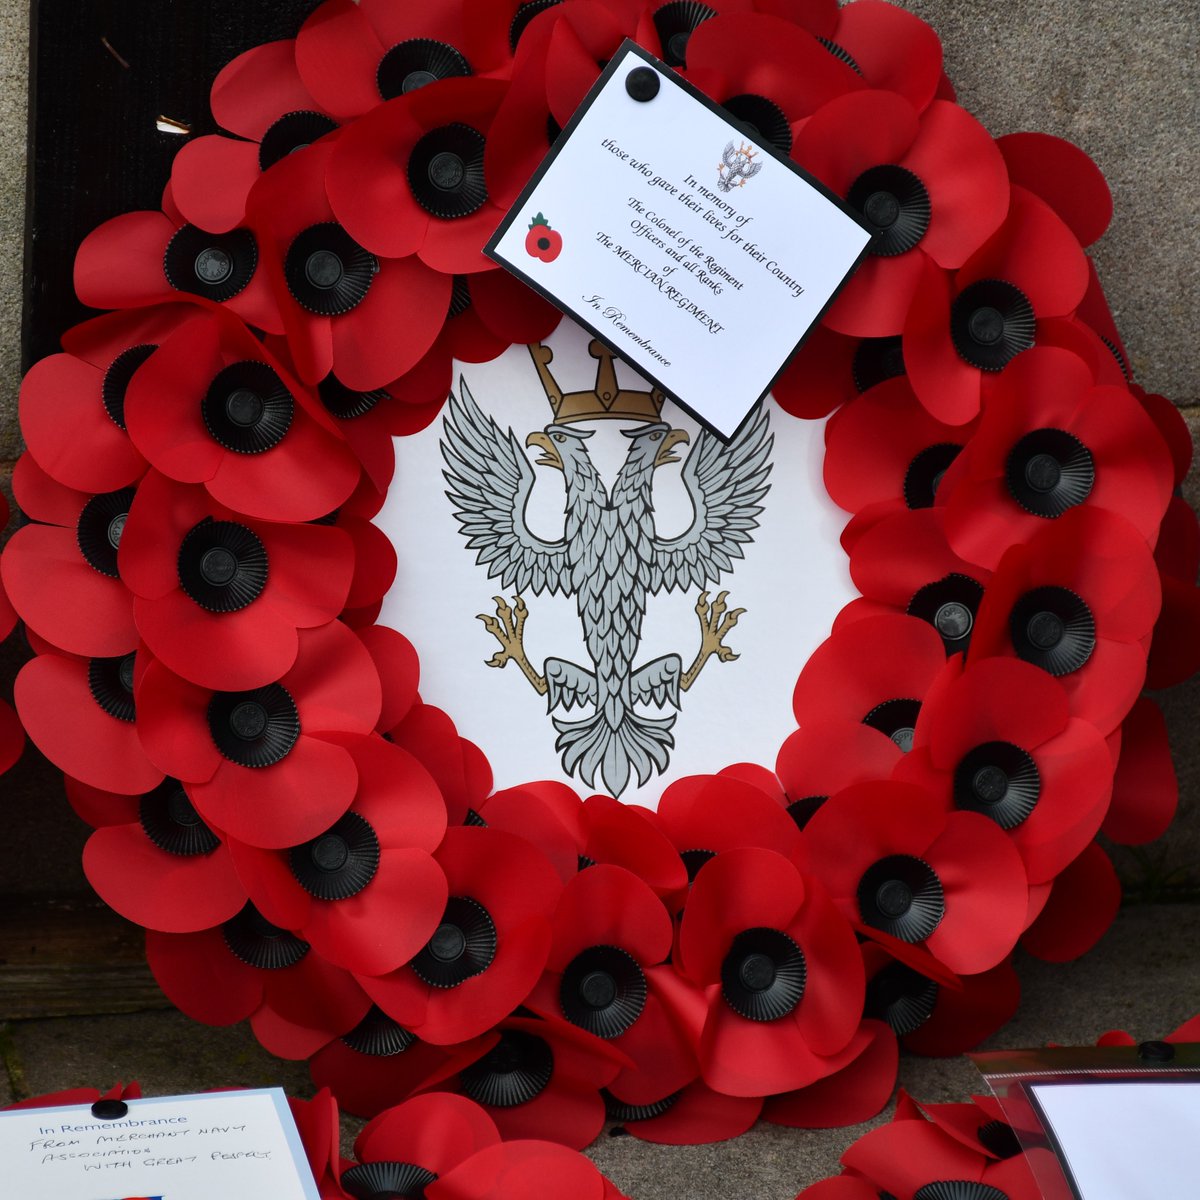 This morning soldiers and officers from The Mercian Regiment are attending services and laying wreaths at memorials and cenotaphs across the country. Countless lives have been lost to war. We should remember the sacrifices given so that we may live. Lest We Forget.